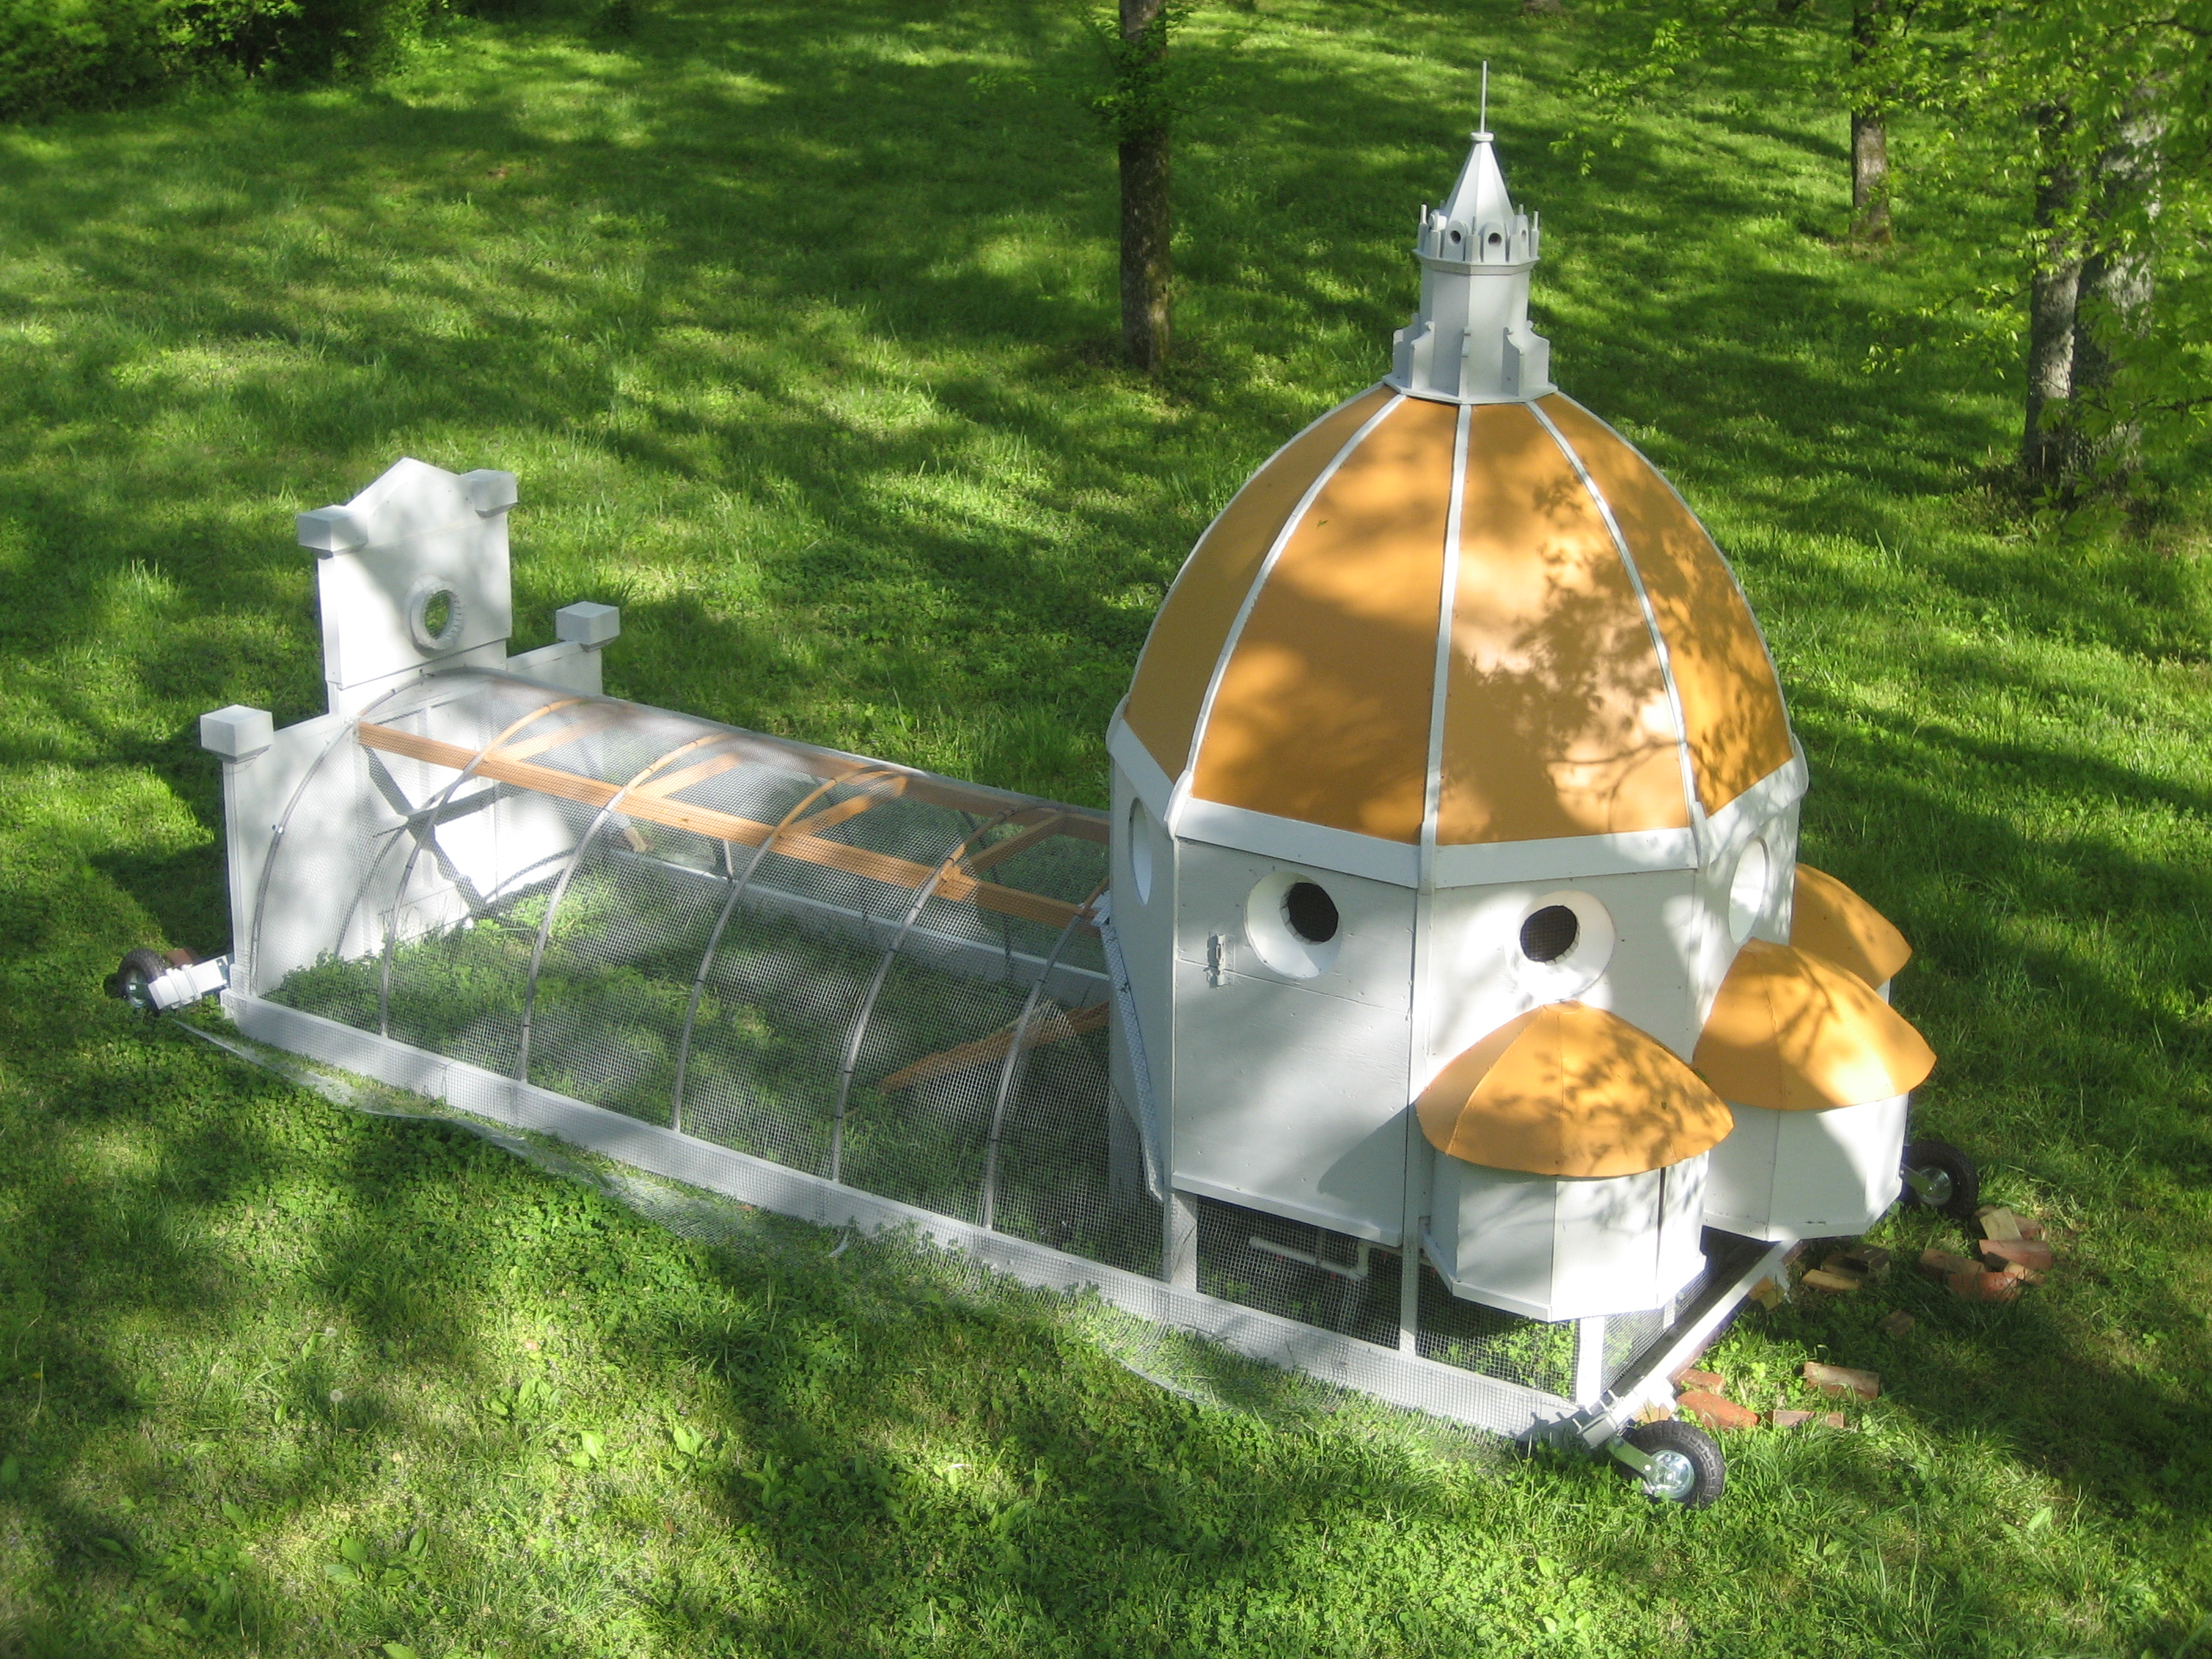 This is my chicken tractor, you can see more detail on greatestchickentractor.com